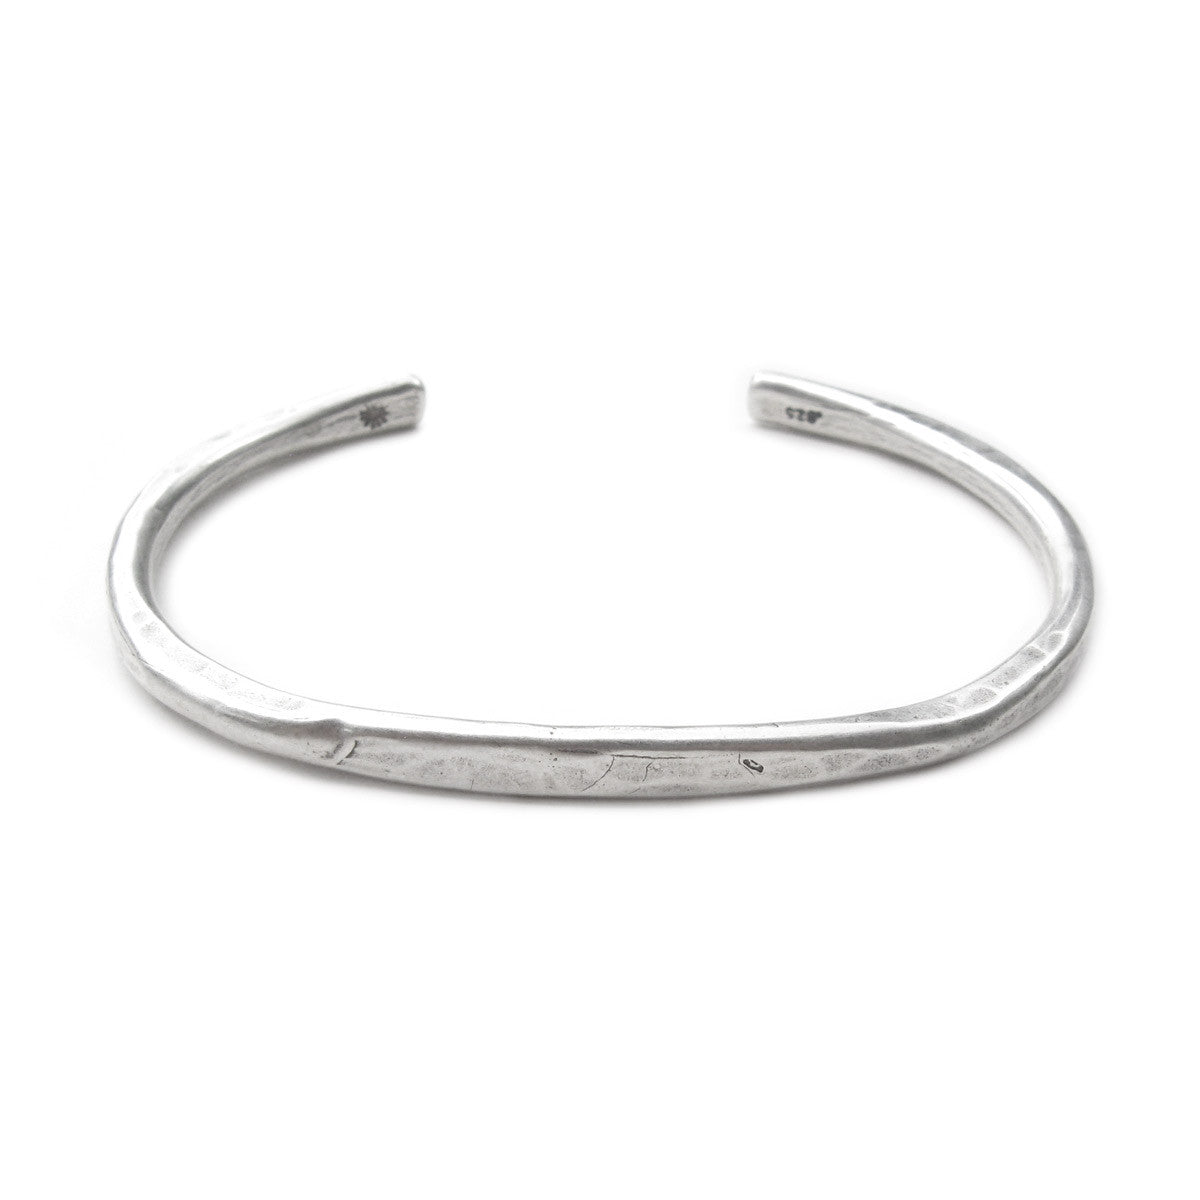 mens-jewelry-cuff-bracelet-sterling-silver-handcrafted-sustainable